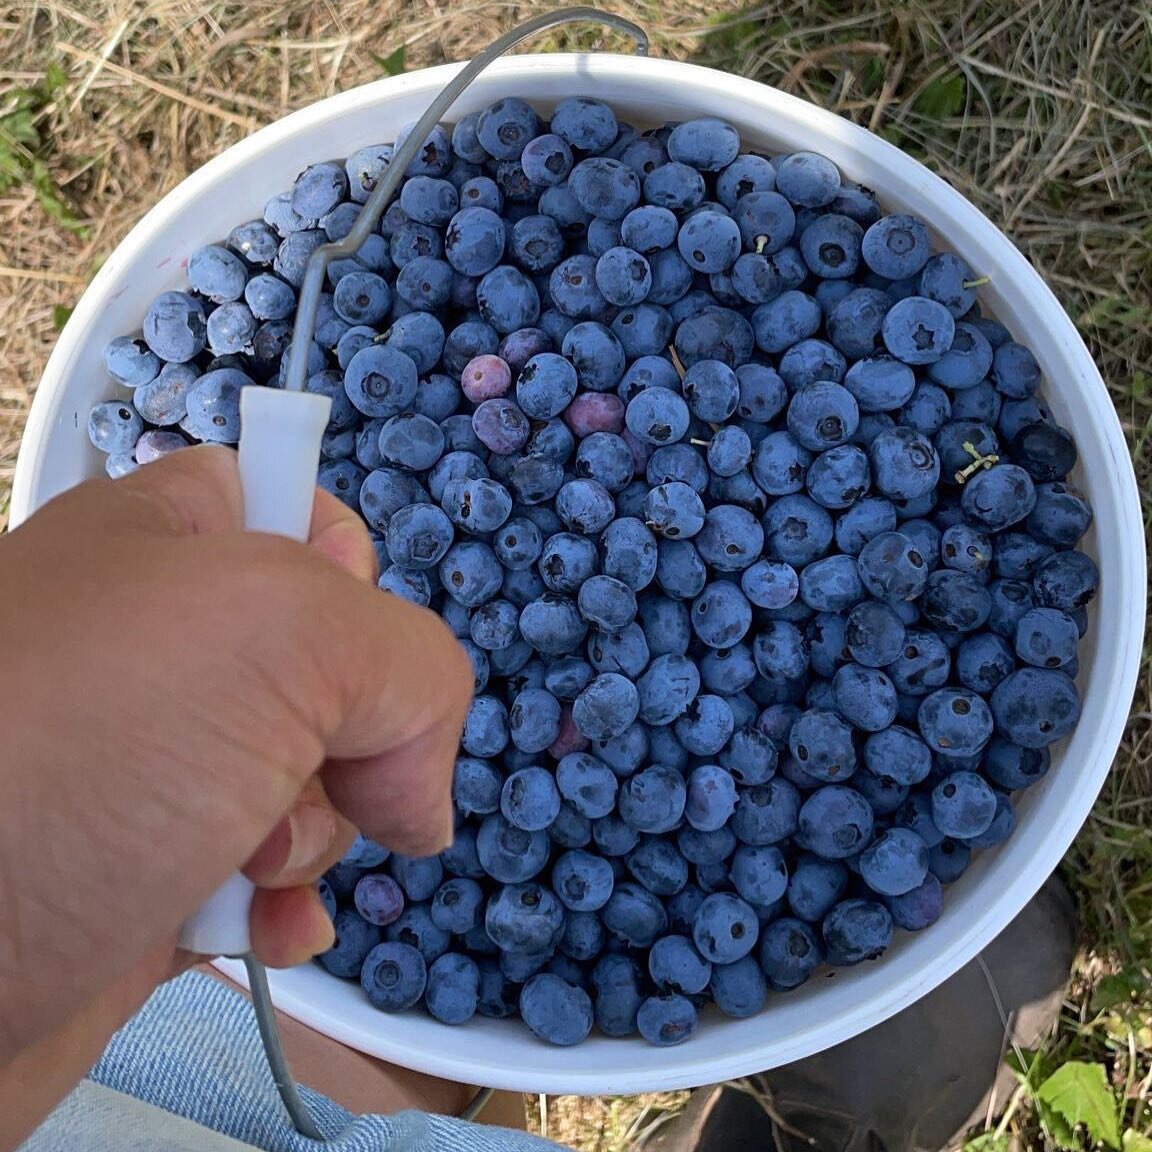 Thank you everyone who came out for opening season of the U-Pick here at Northstar Blueberry Farm! The blueberries are just getting started. We will be open in Field 1 this weekend! Plenty more ripe delicious berries, look for the blue sign on the si